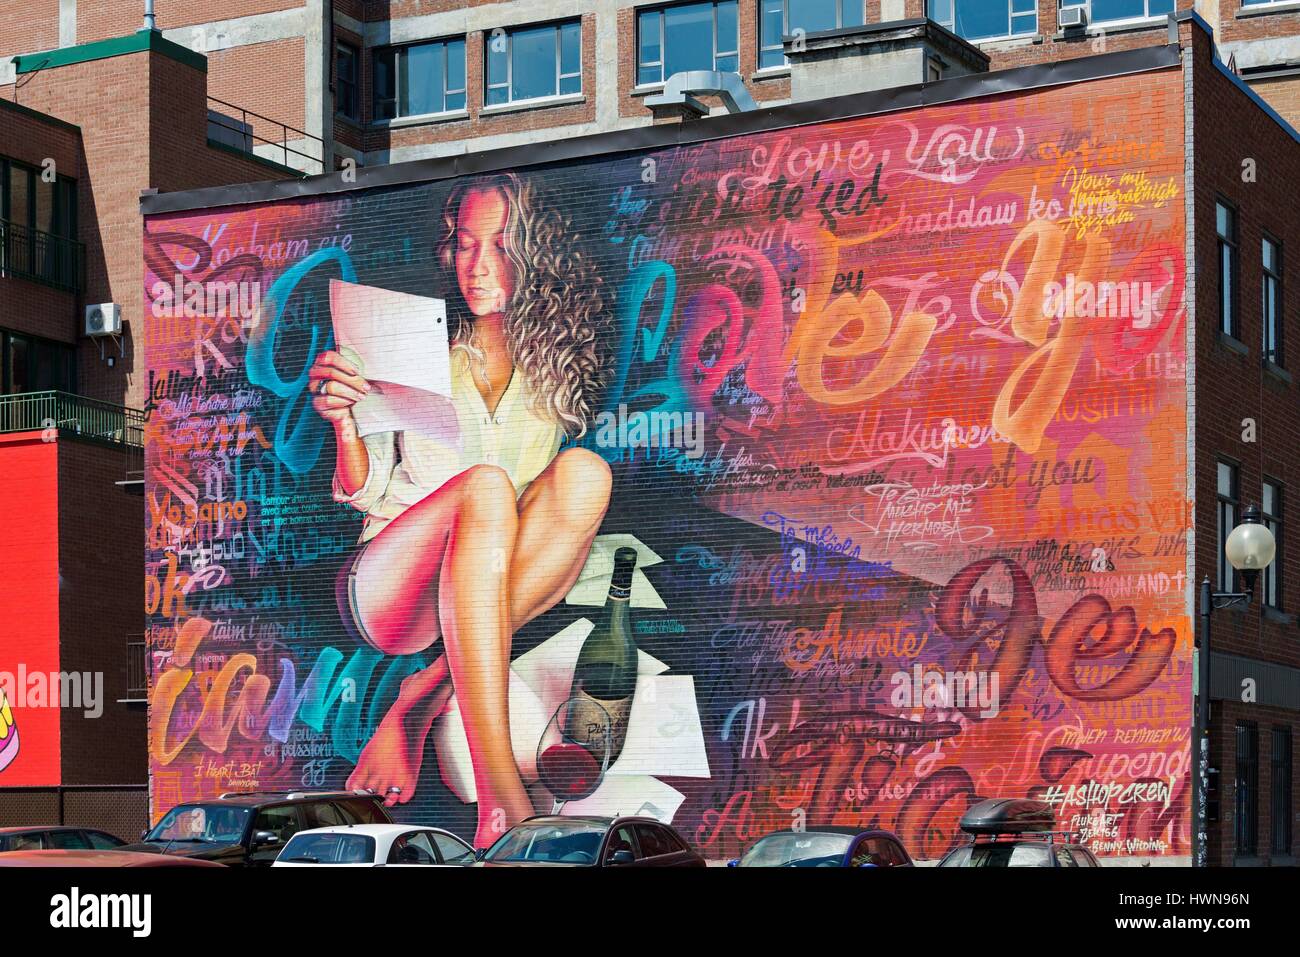 Canada, Province of Quebec, Montreal The love letters by A'Shop for Mural Festival 2015, The fresco was designed by Fluke and performed with the help of Zek and Benny Wilding This mural is inspired by the famous wall of Verona where Romeo and Juliet would have met and where thousands of passers-by add love writen messages, creating a chaotic graffiti painting expressing the deepest human feeling Stock Photo